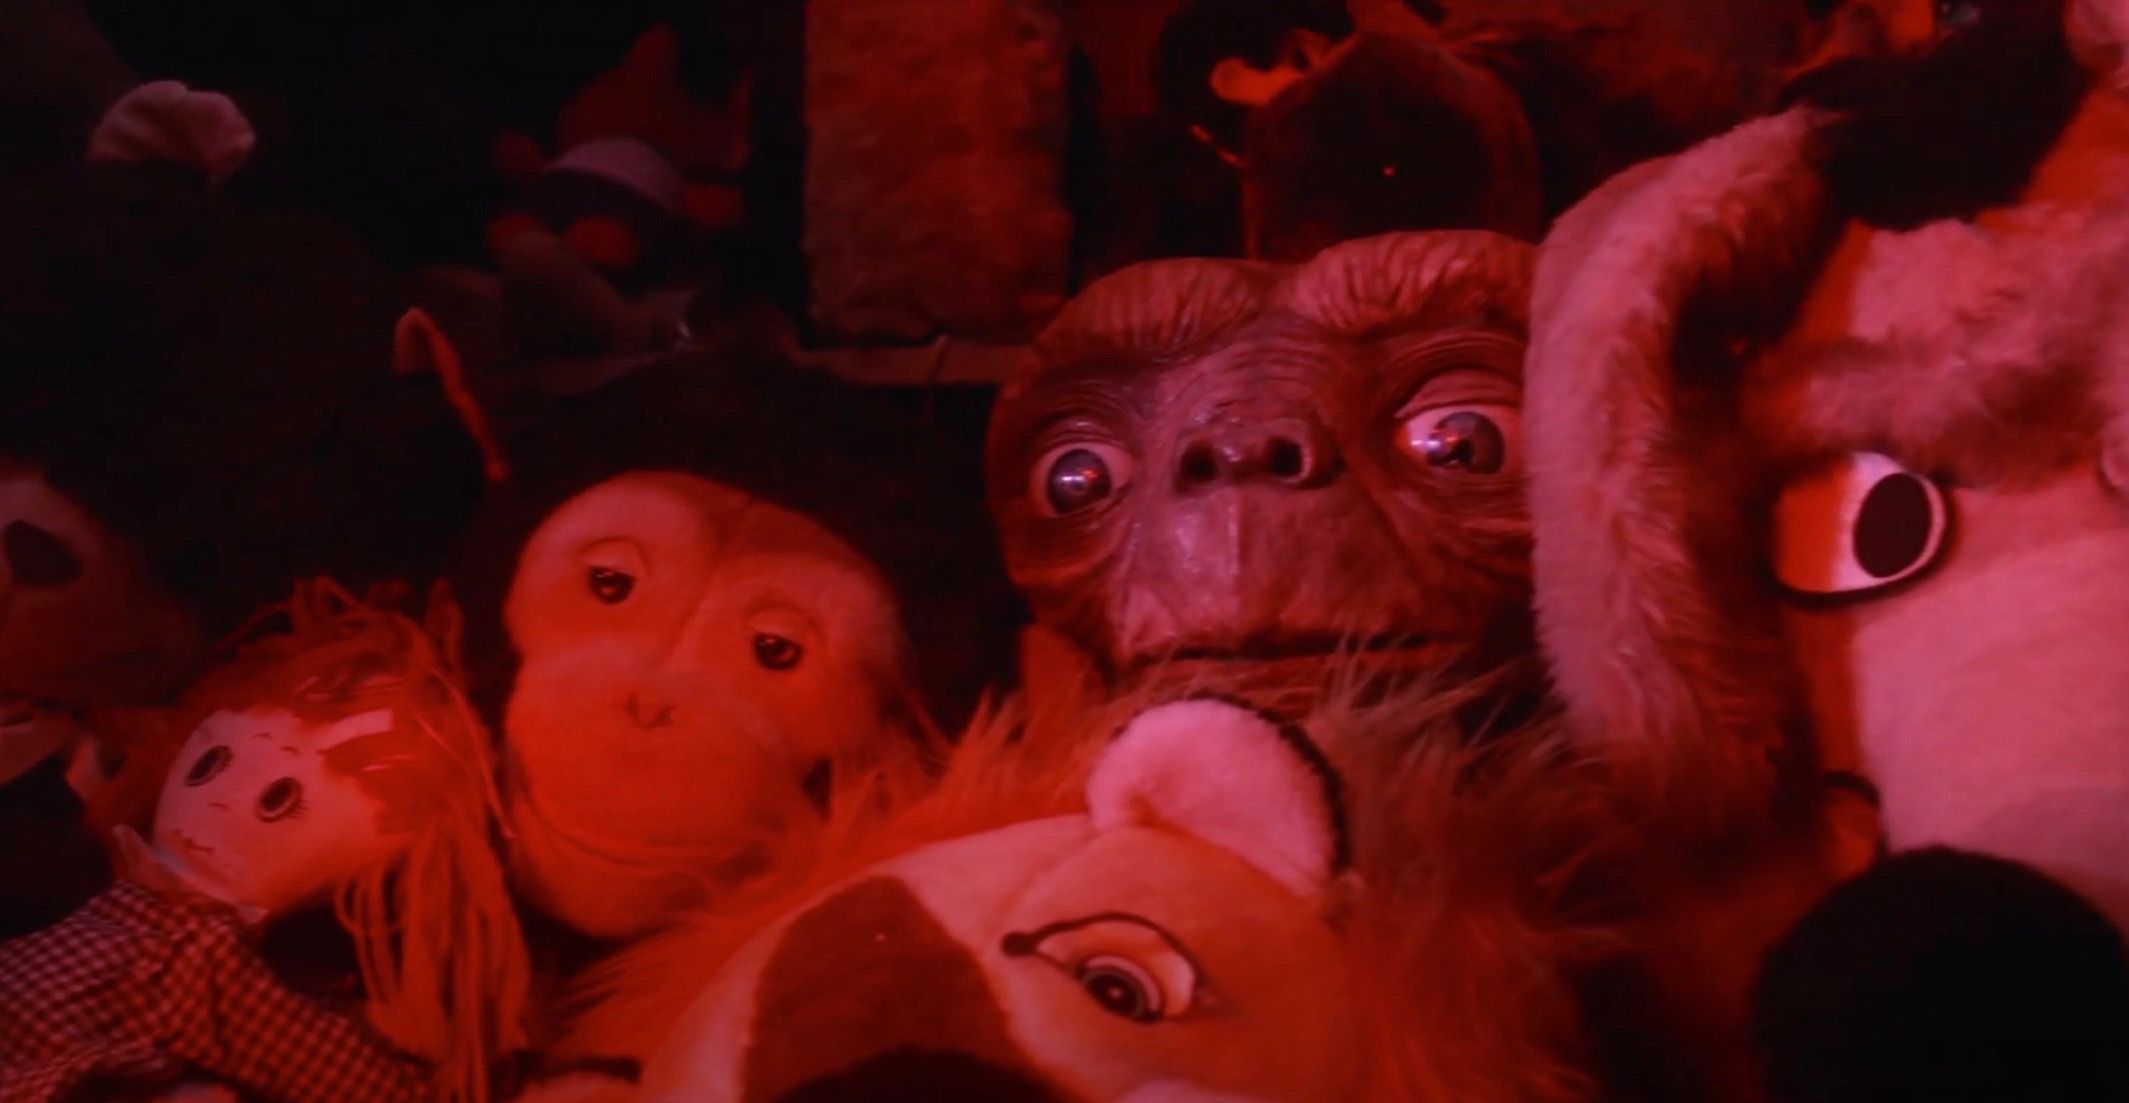 E.T. hiding in a bunch of stuffed animals around him.